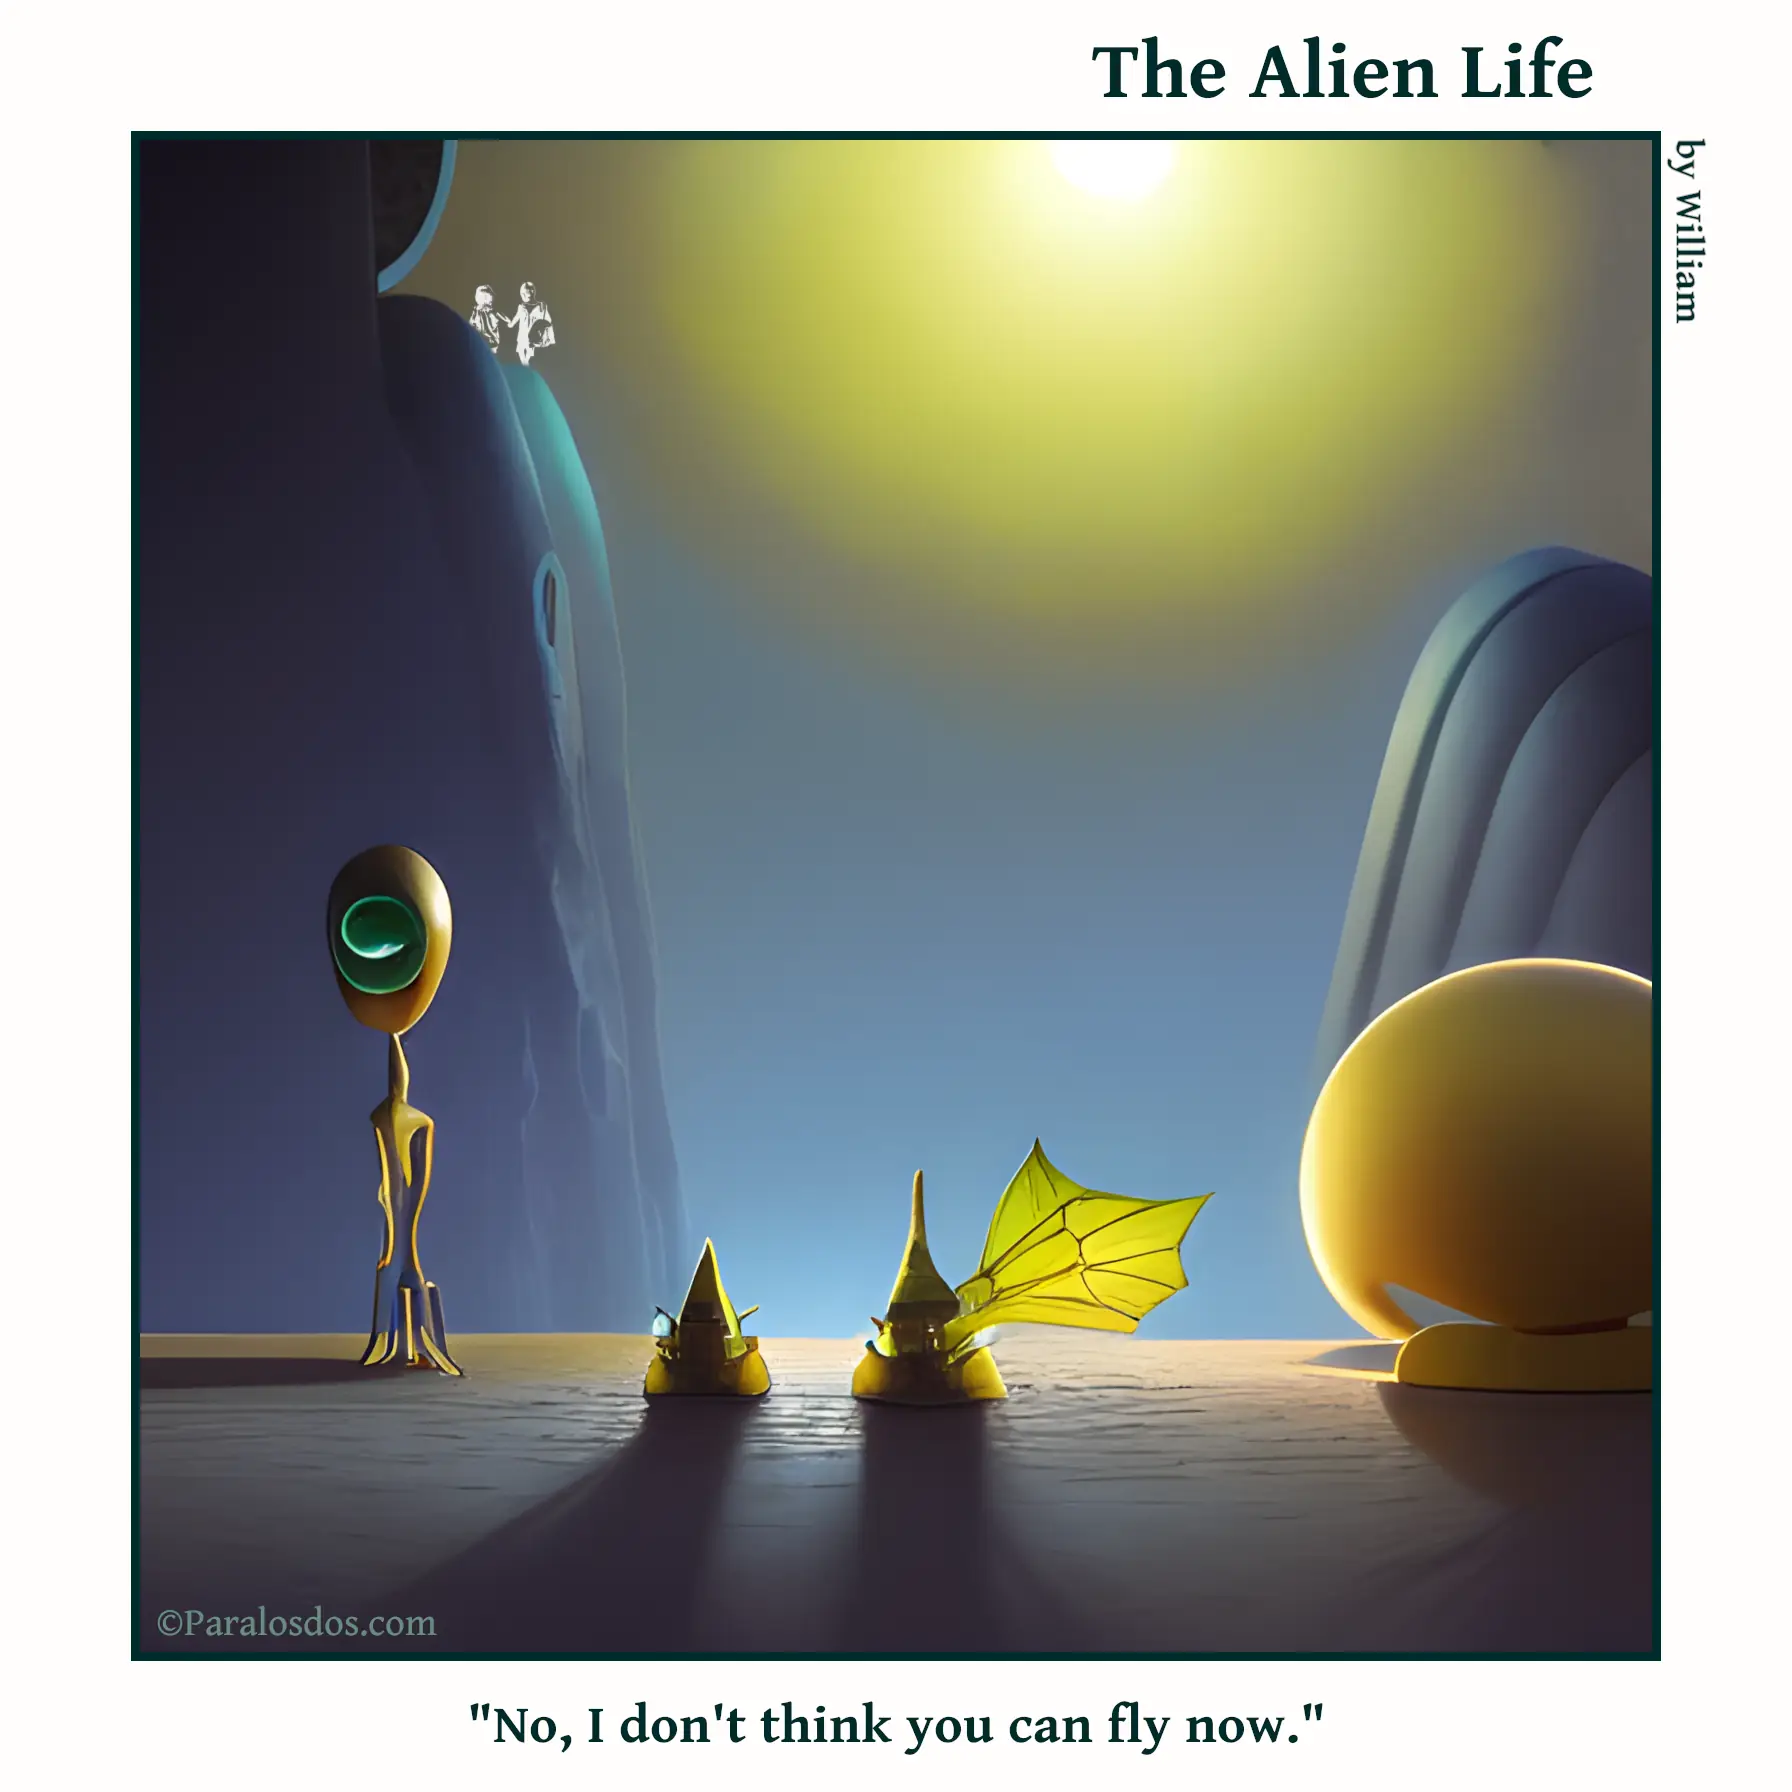 The Alien Life, one panel Comic. Two aliens are sitting together. One of them has one wing growing out of one side of herms body. The caption reads: "No, I don't think you can fly now."